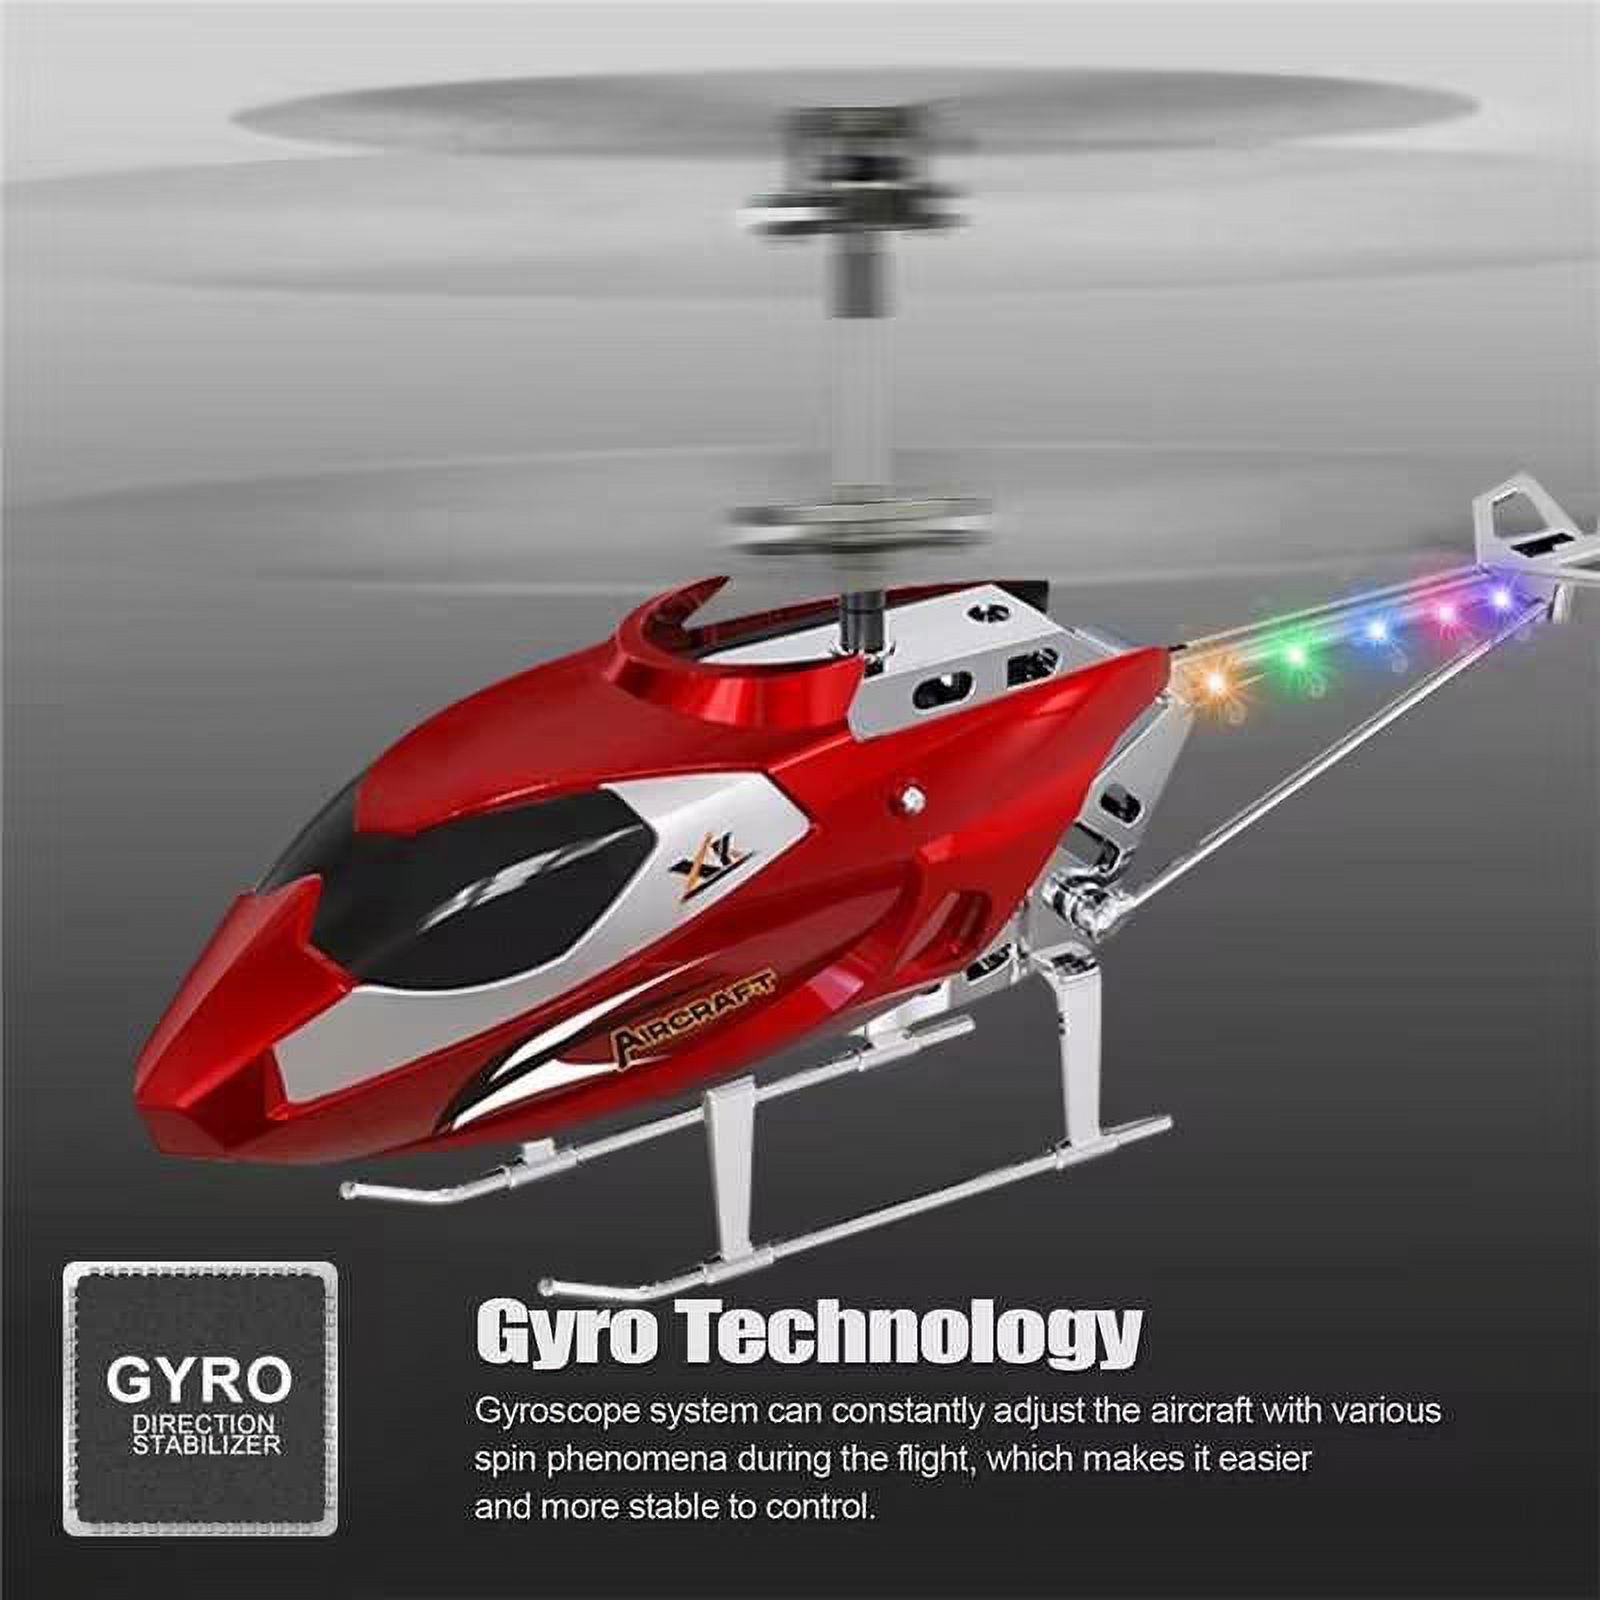 PayUSD Remote Control Helicopter Mini Gyroscope RC Helicopters LED Light for Indoor to Fly for Kids and Beginners, Red - image 3 of 8